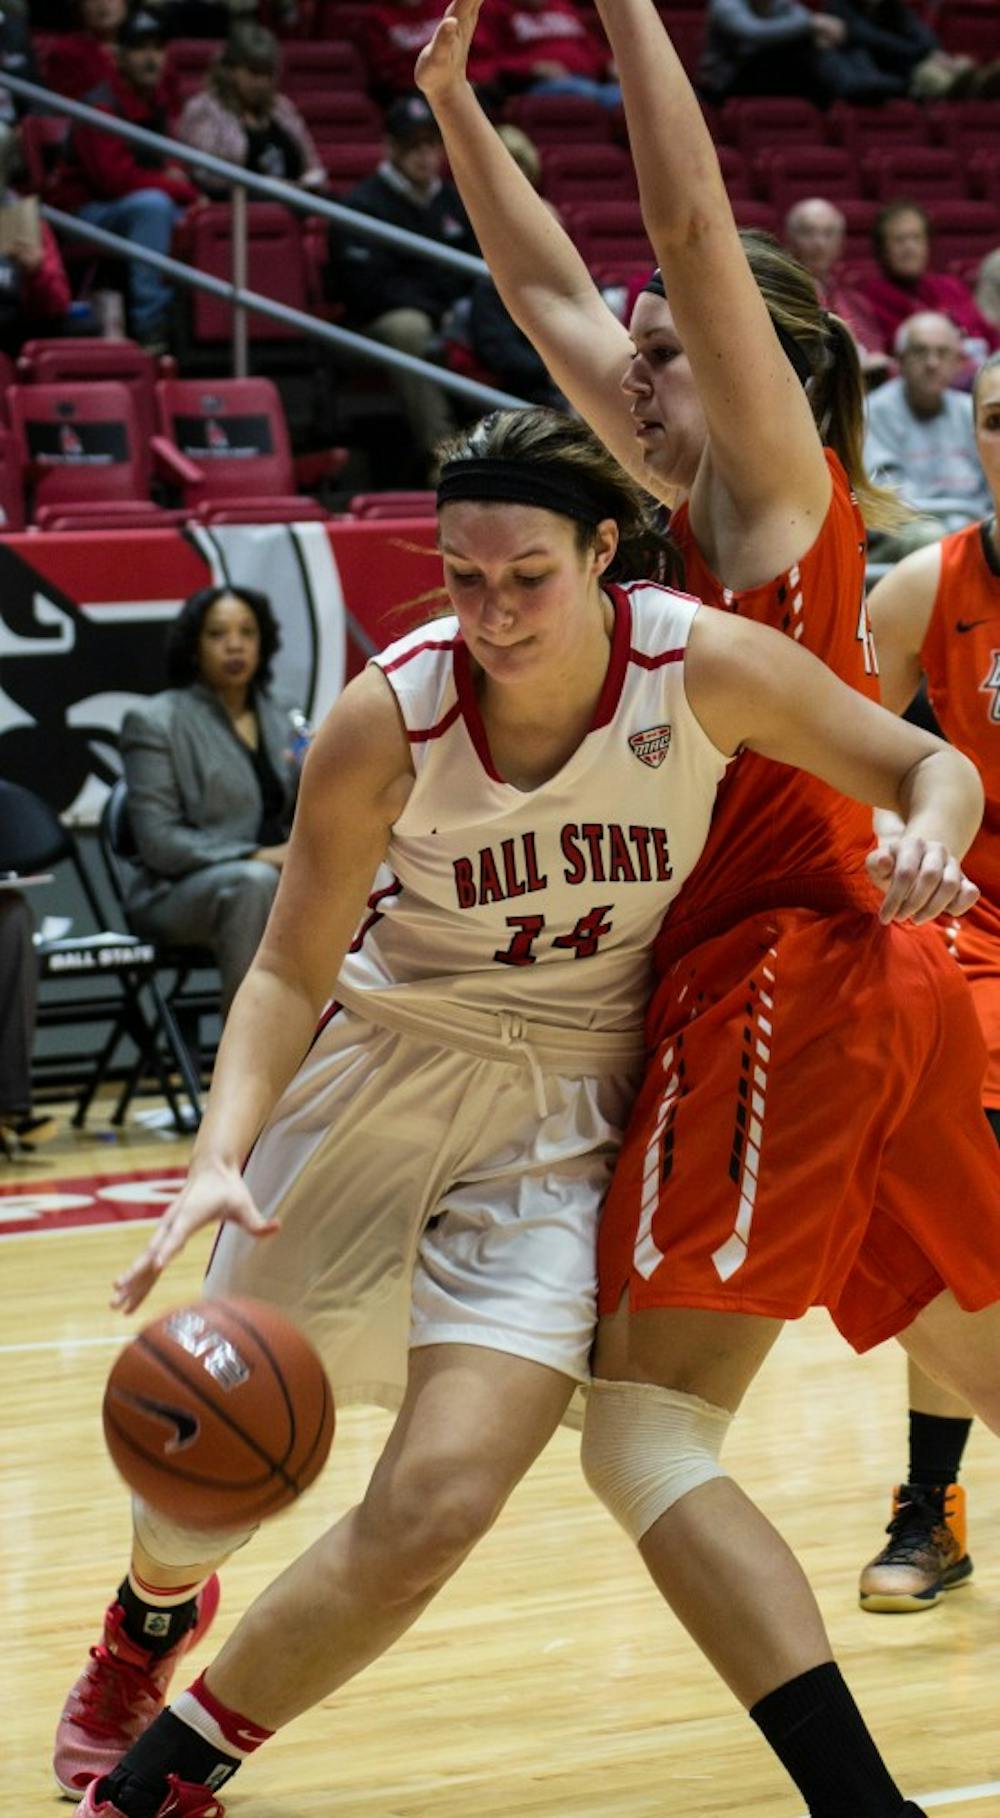 PREVIEW: Ball State women's basketball vs. Western Michigan